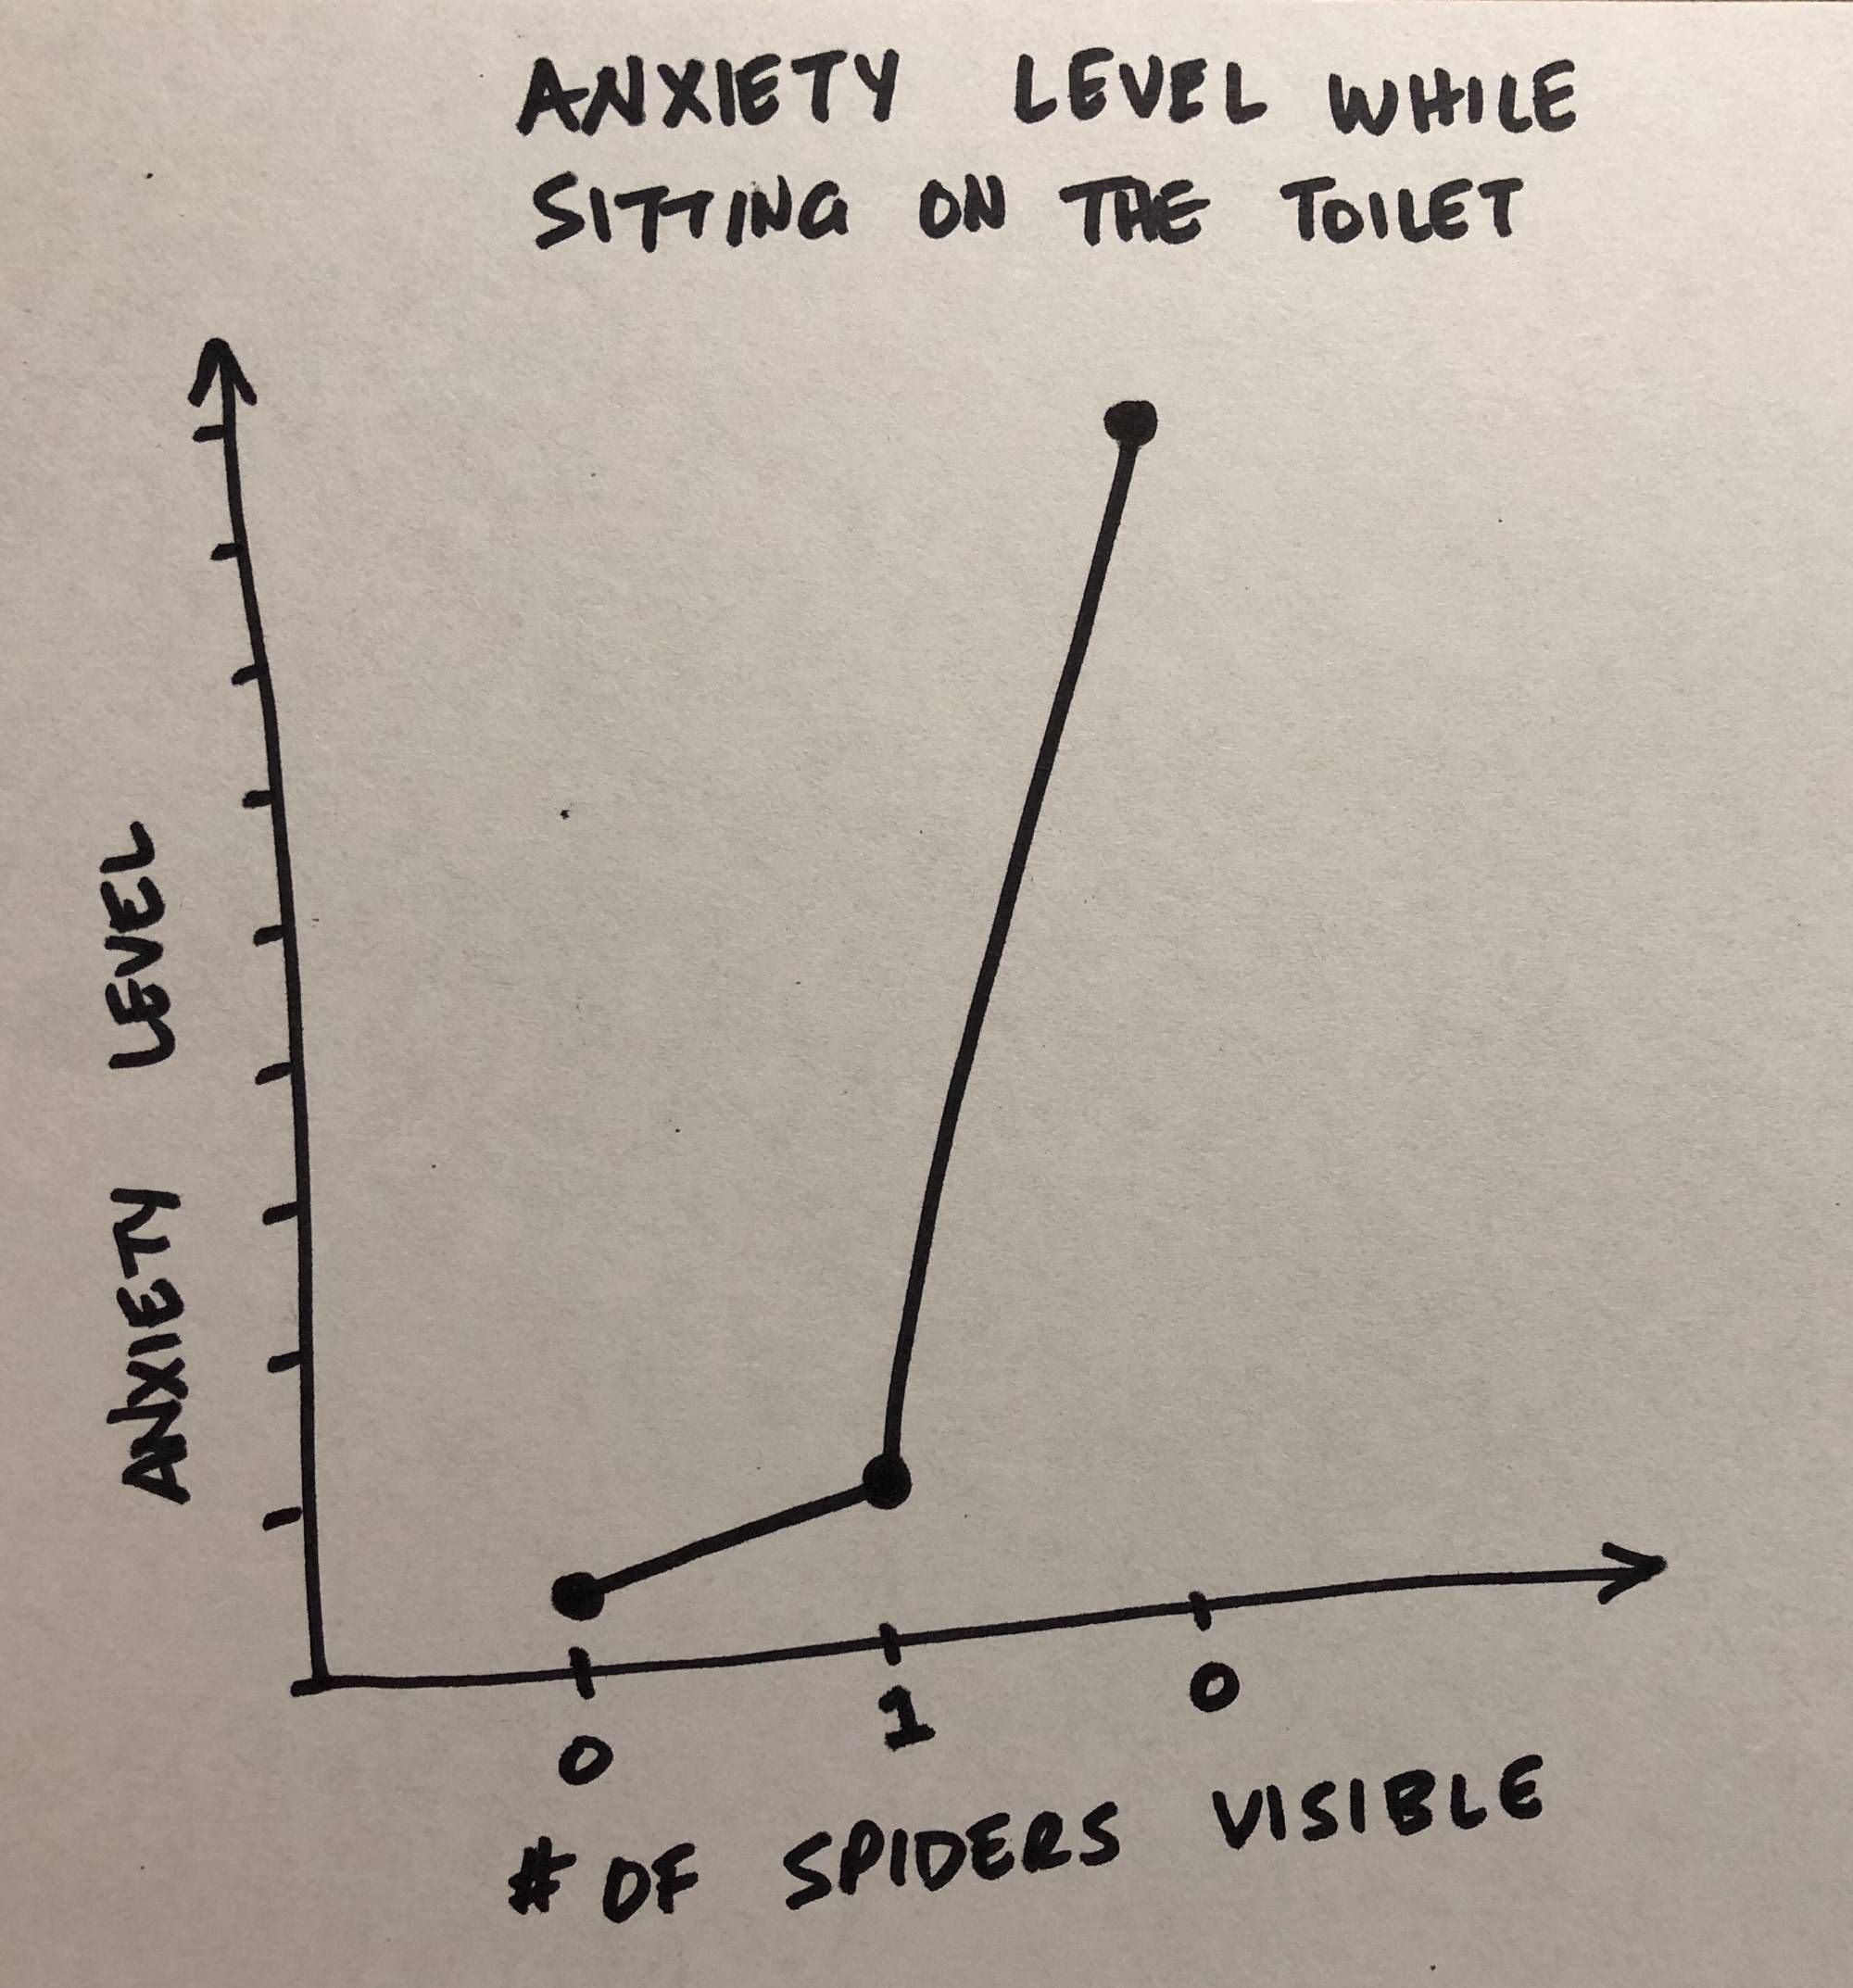 Toilet-Spider Anxiety chart